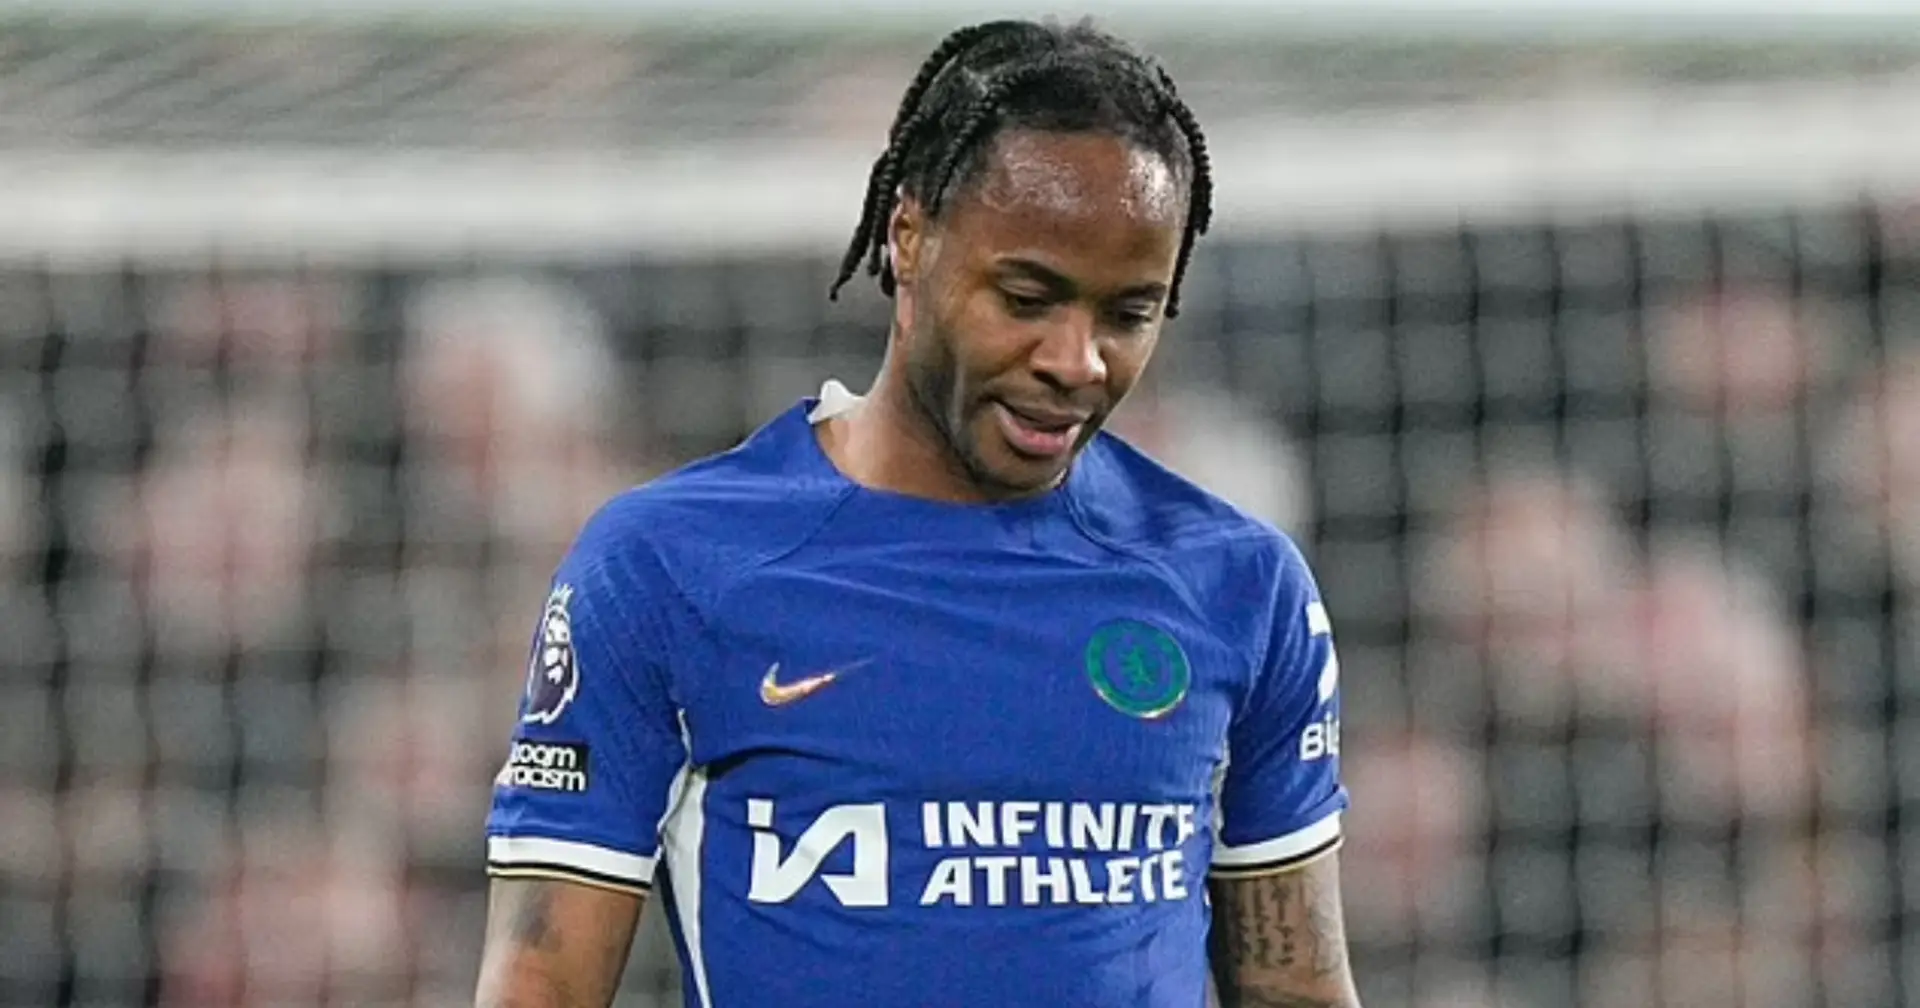 Raheem Sterling determined to win over Chelsea fans despite Saudi interest (reliability: 4 stars)